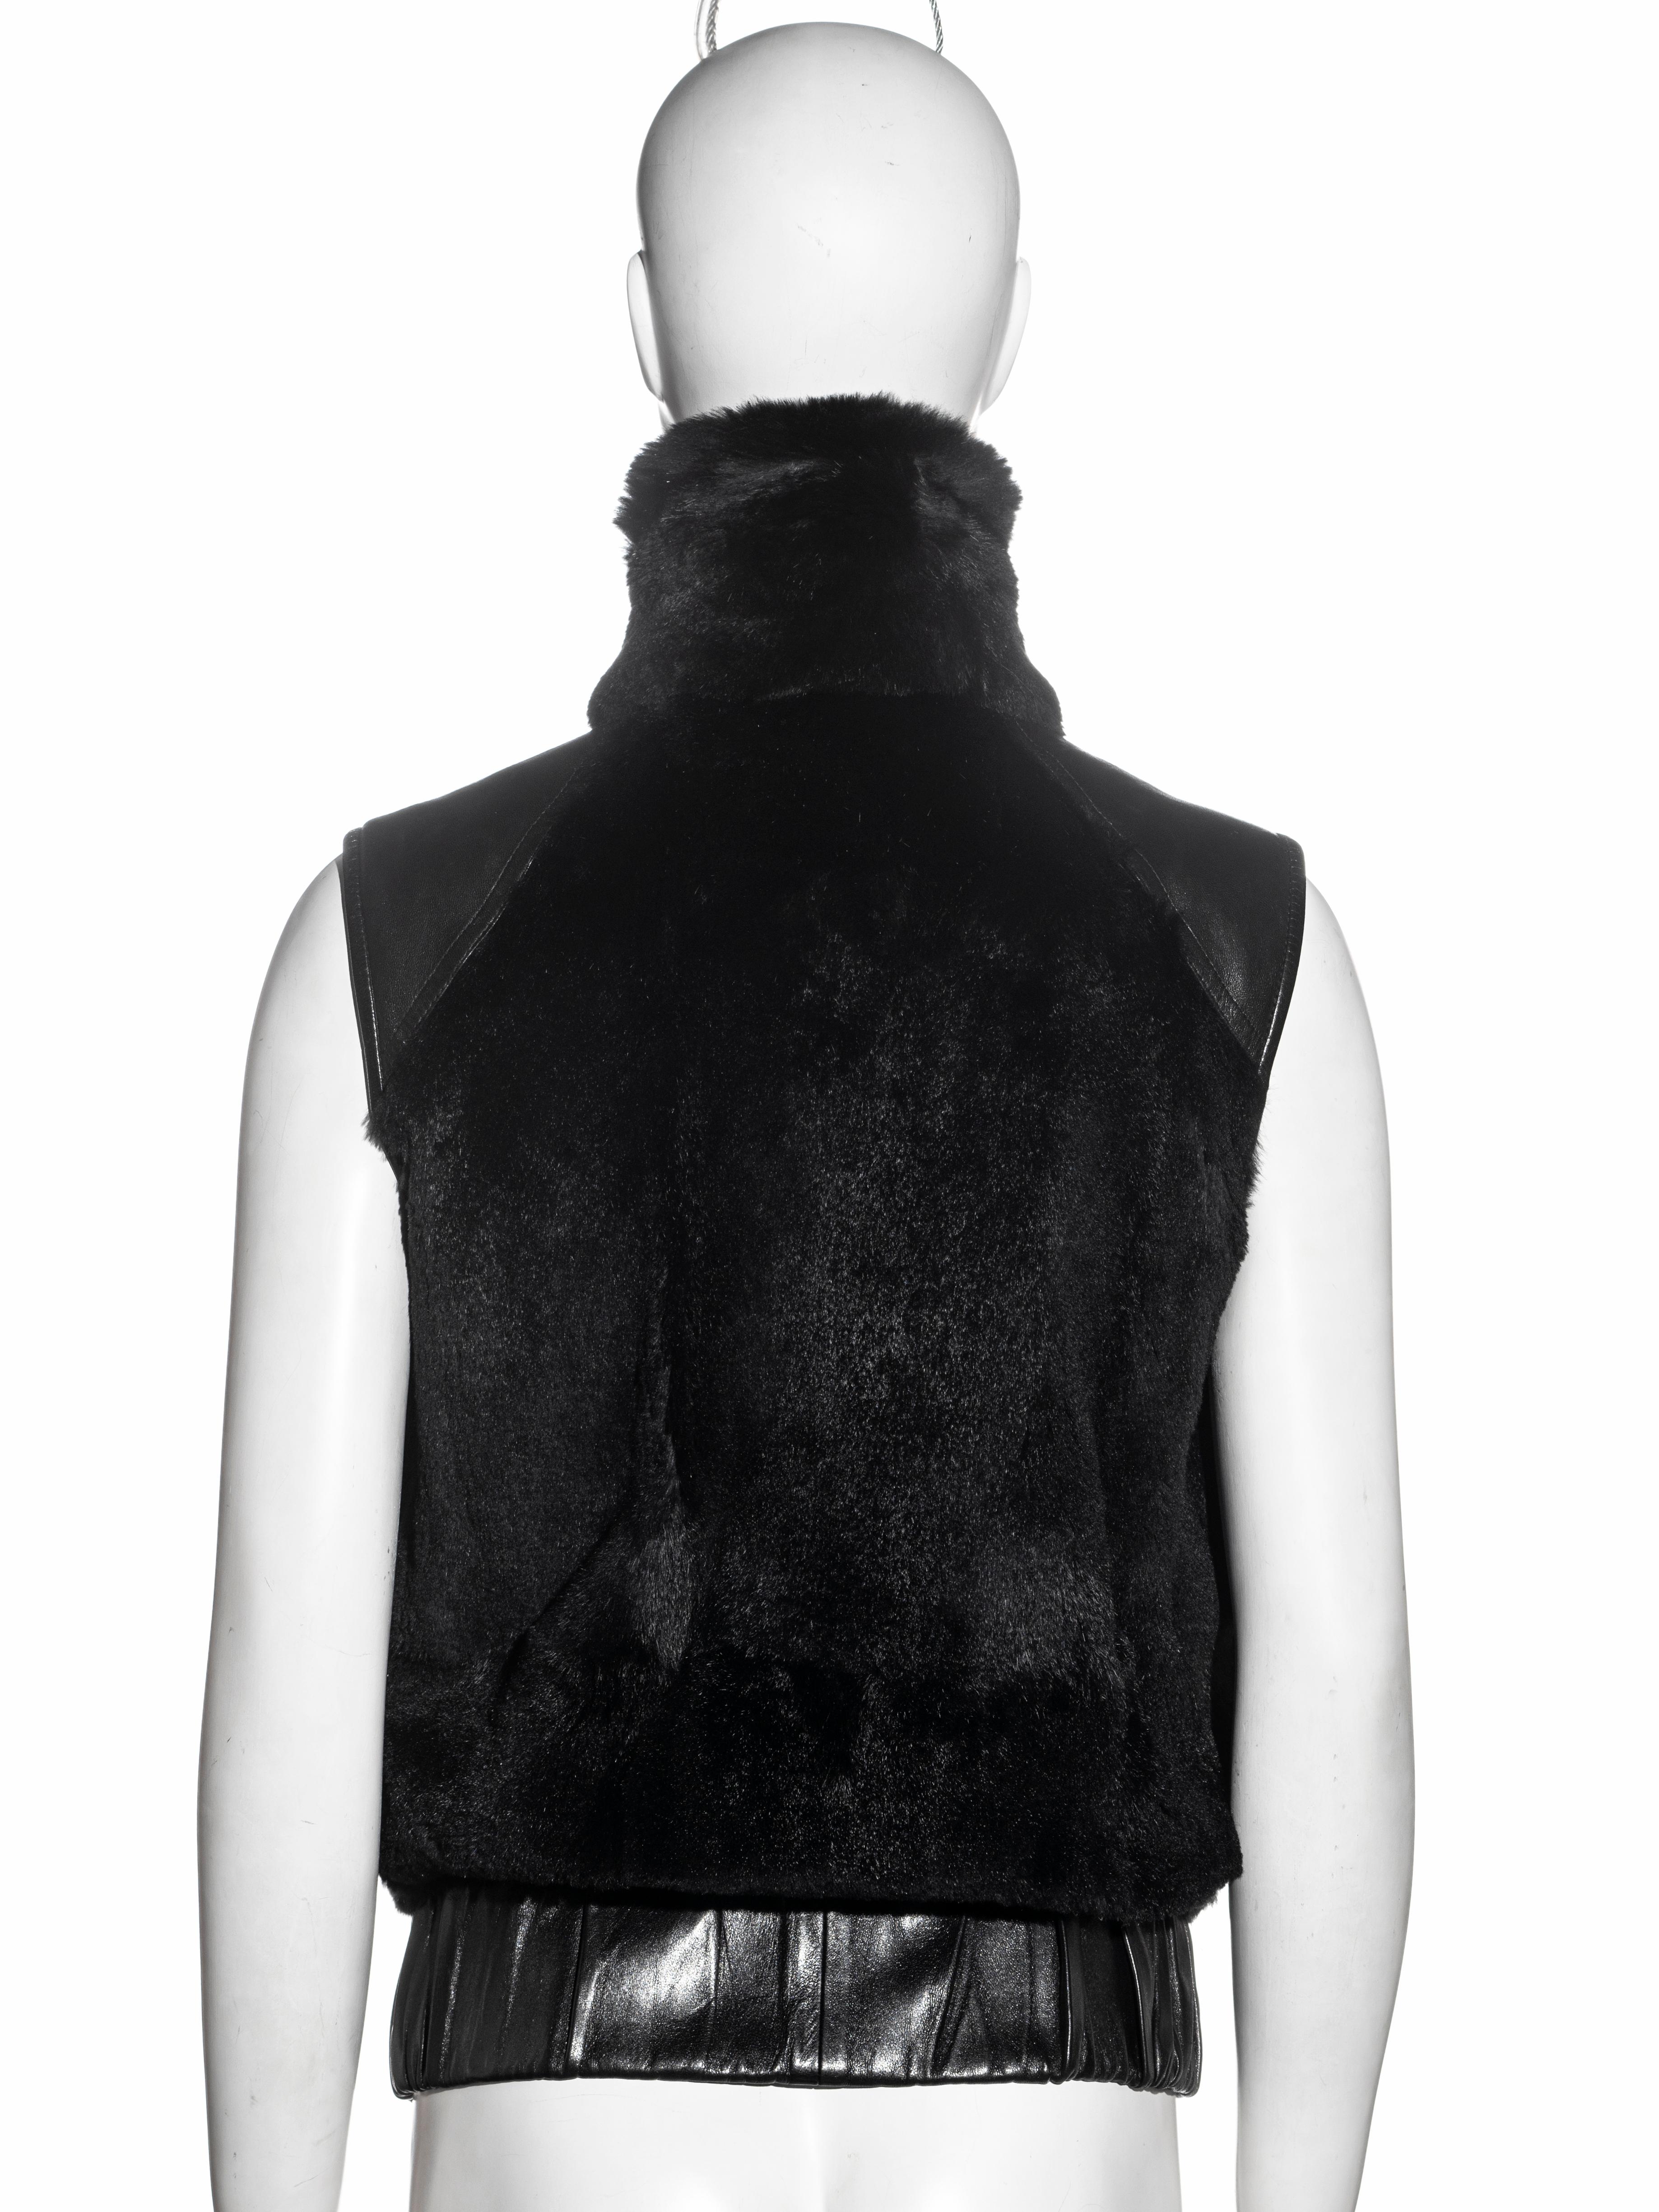 Christian Dior by John Galliano black leather and fur gillet, fw 2003 For Sale 1